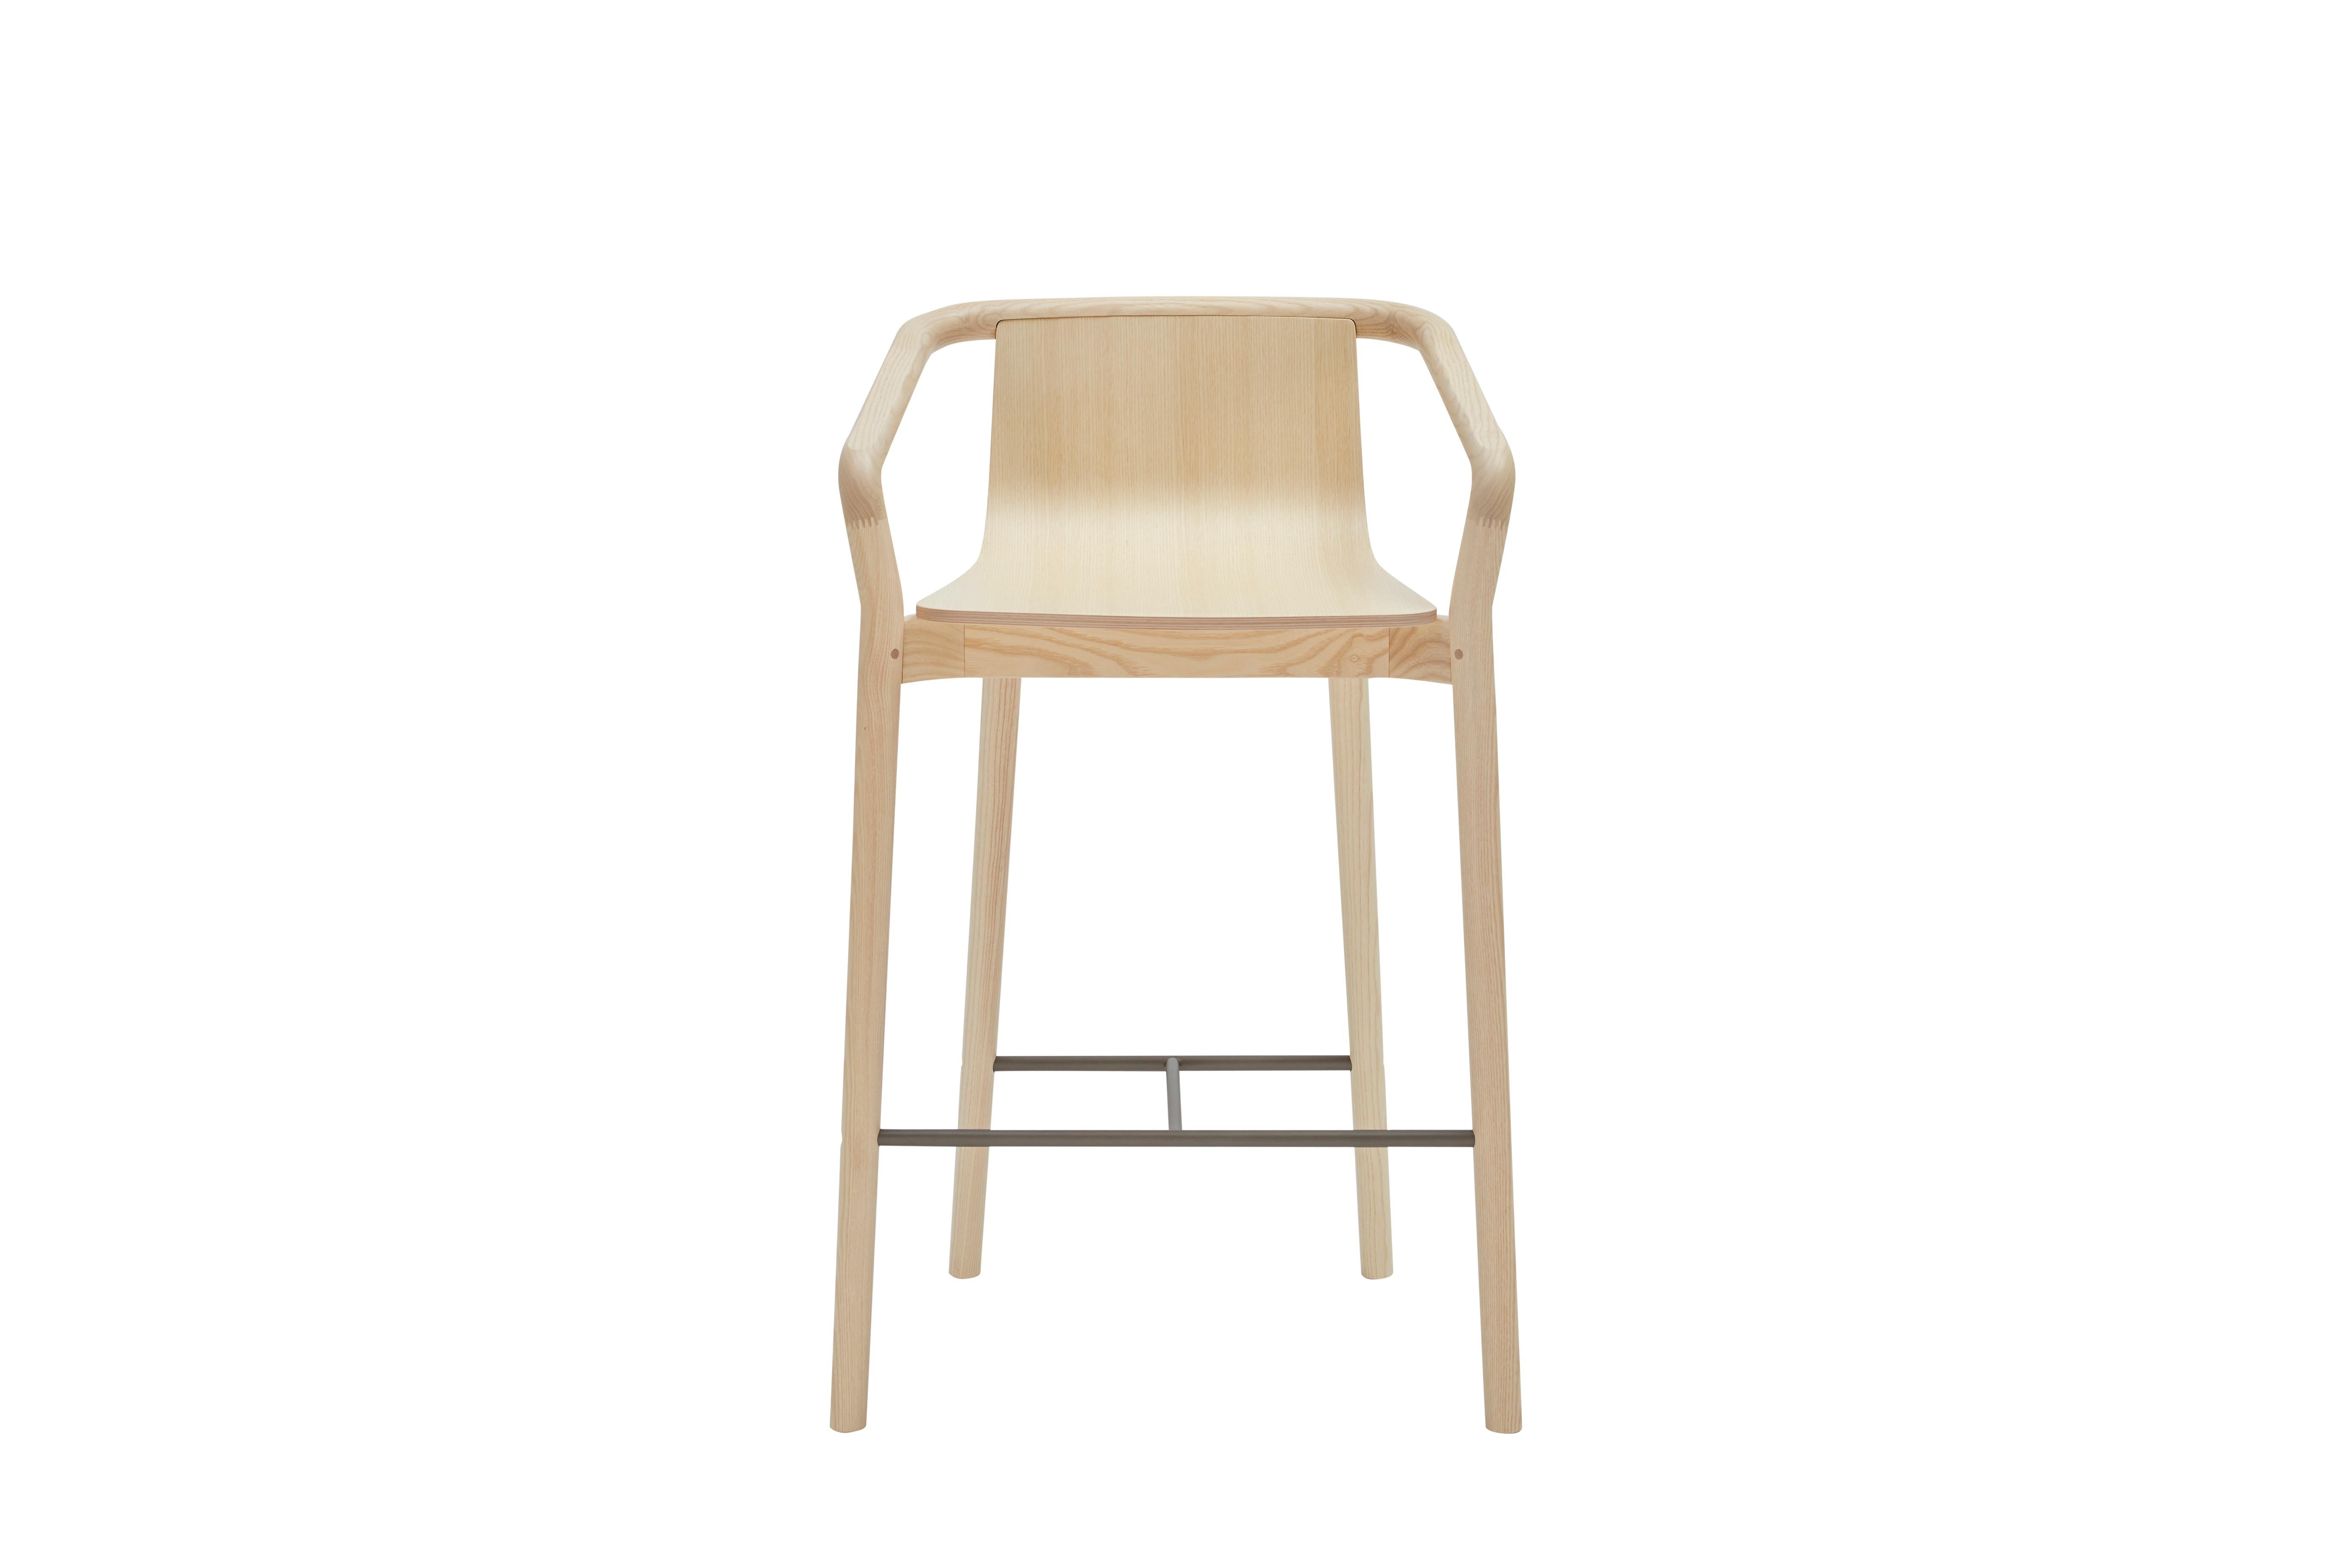 The Thomas mid-height barstool completes the Thomas Family and is derived from the same design elements that define the series.
Featuring a formed plywood shell suspended in a solid ash frame with the distinctive carved armrest detail, the footrest